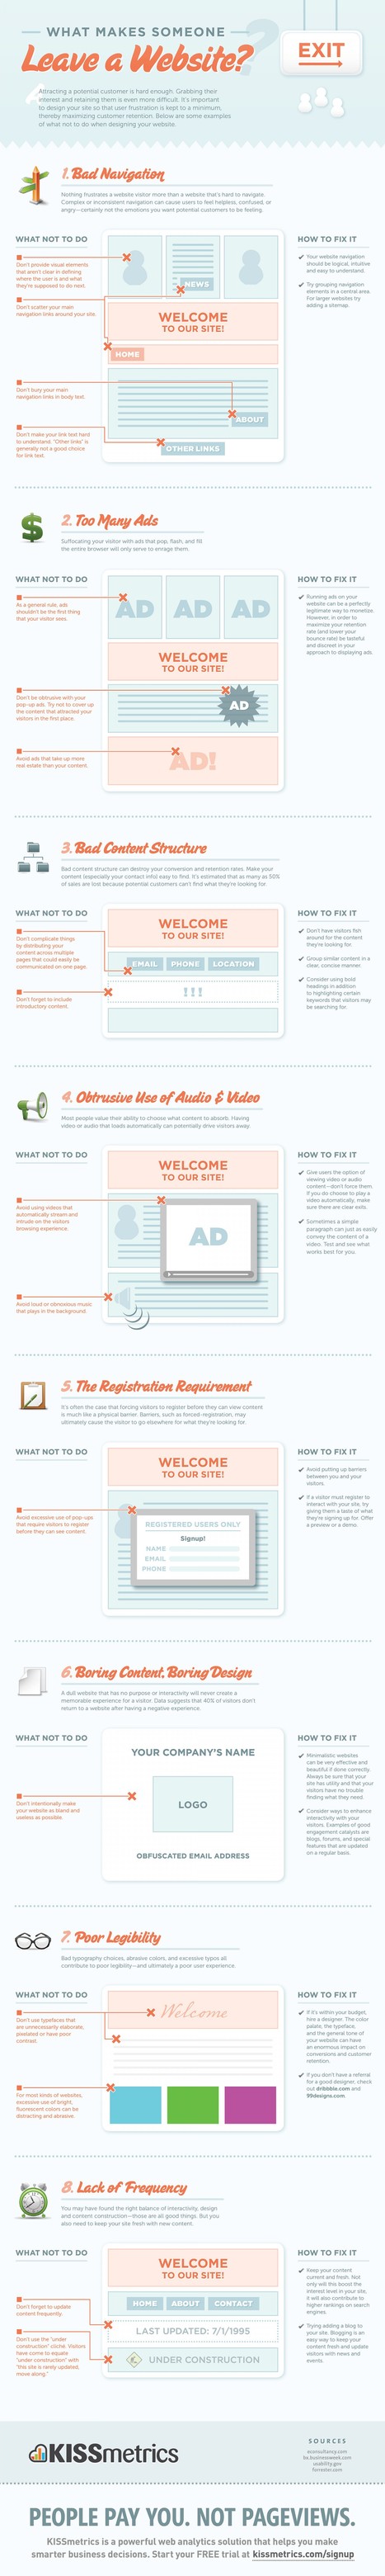 Avoid These 8 Deadly Sins of Site Design | Infographic | Must Design | Scoop.it